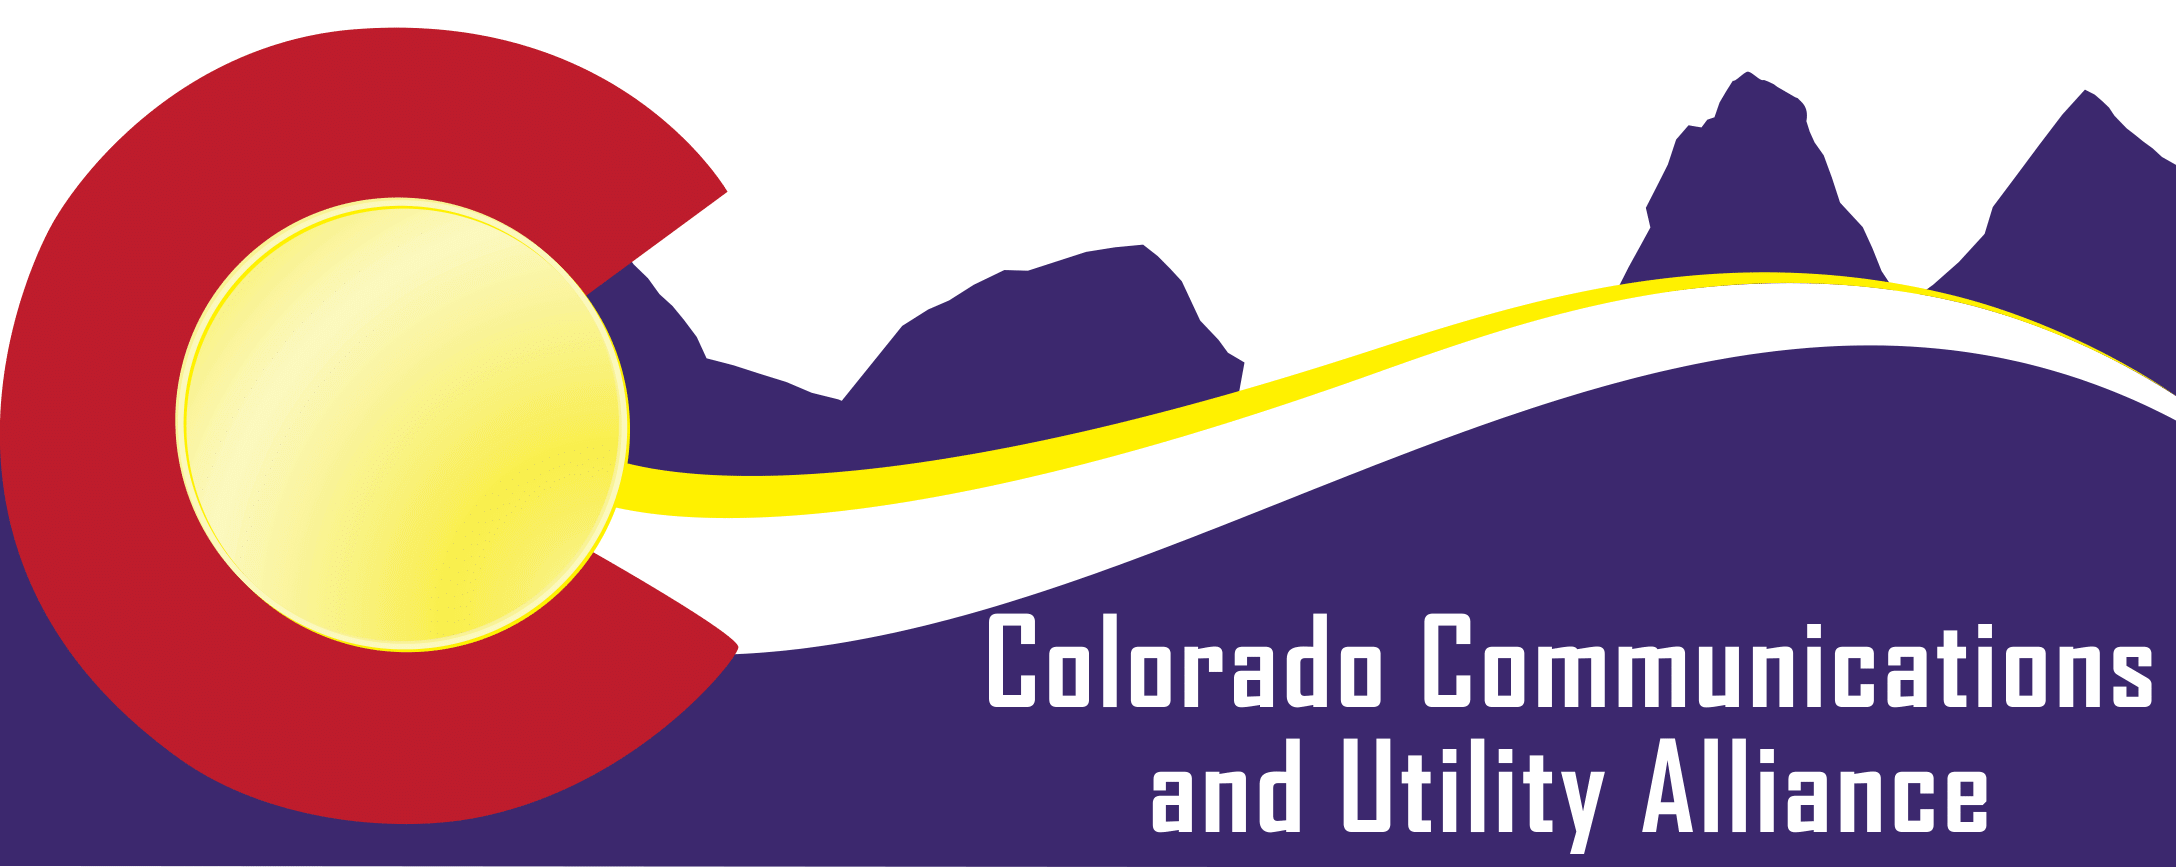 Colorado Communications and Utility Alliance